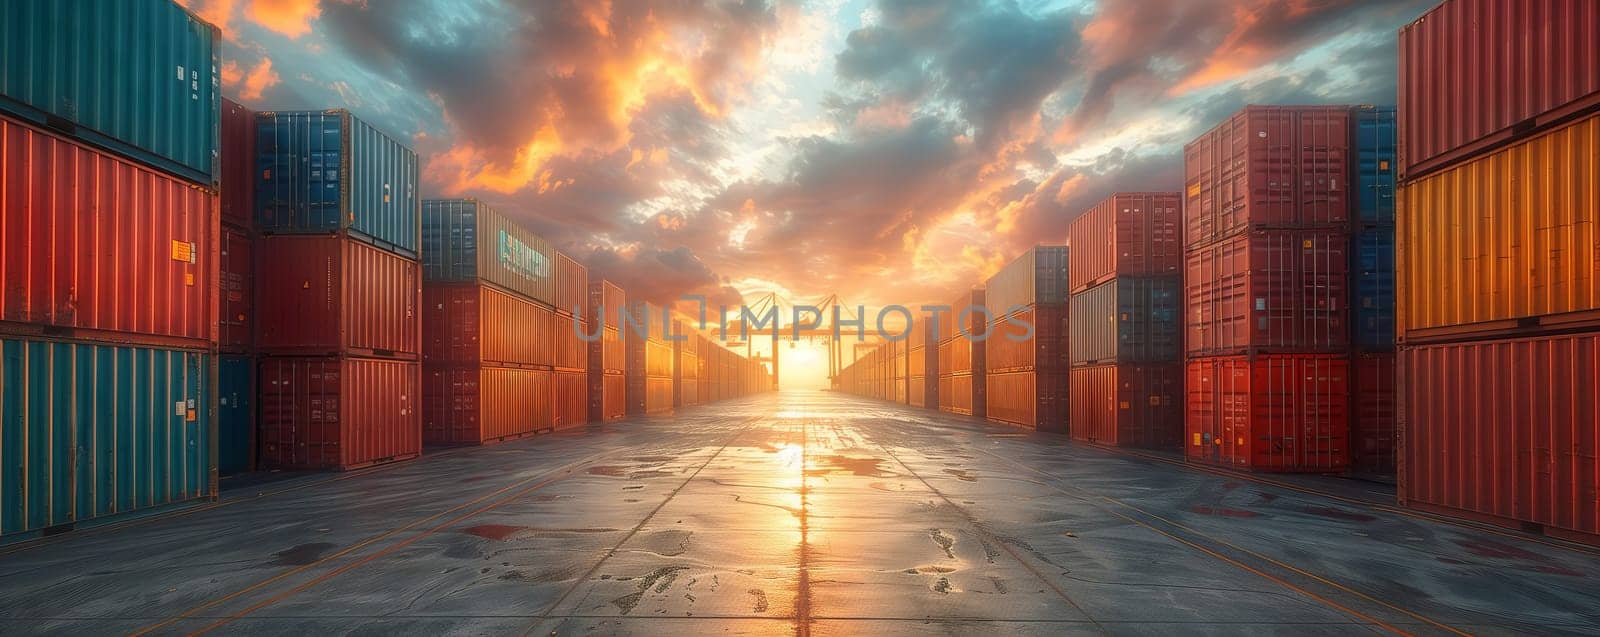 The sun breaks through the clouds, casting shadows over the shipping containers in a picturesque natural landscape